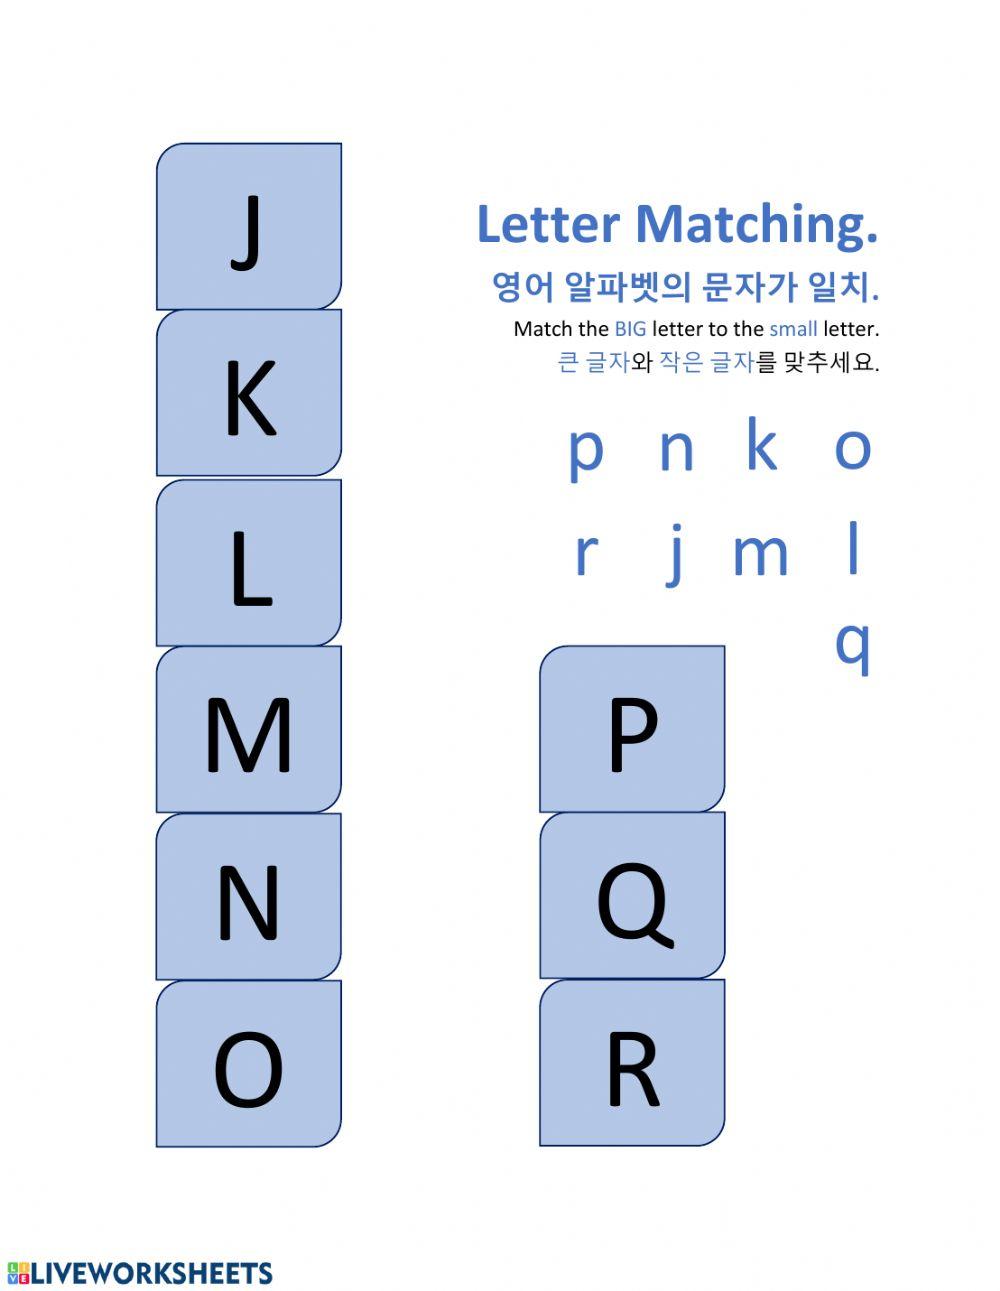 Mixed Letter Matching J-R